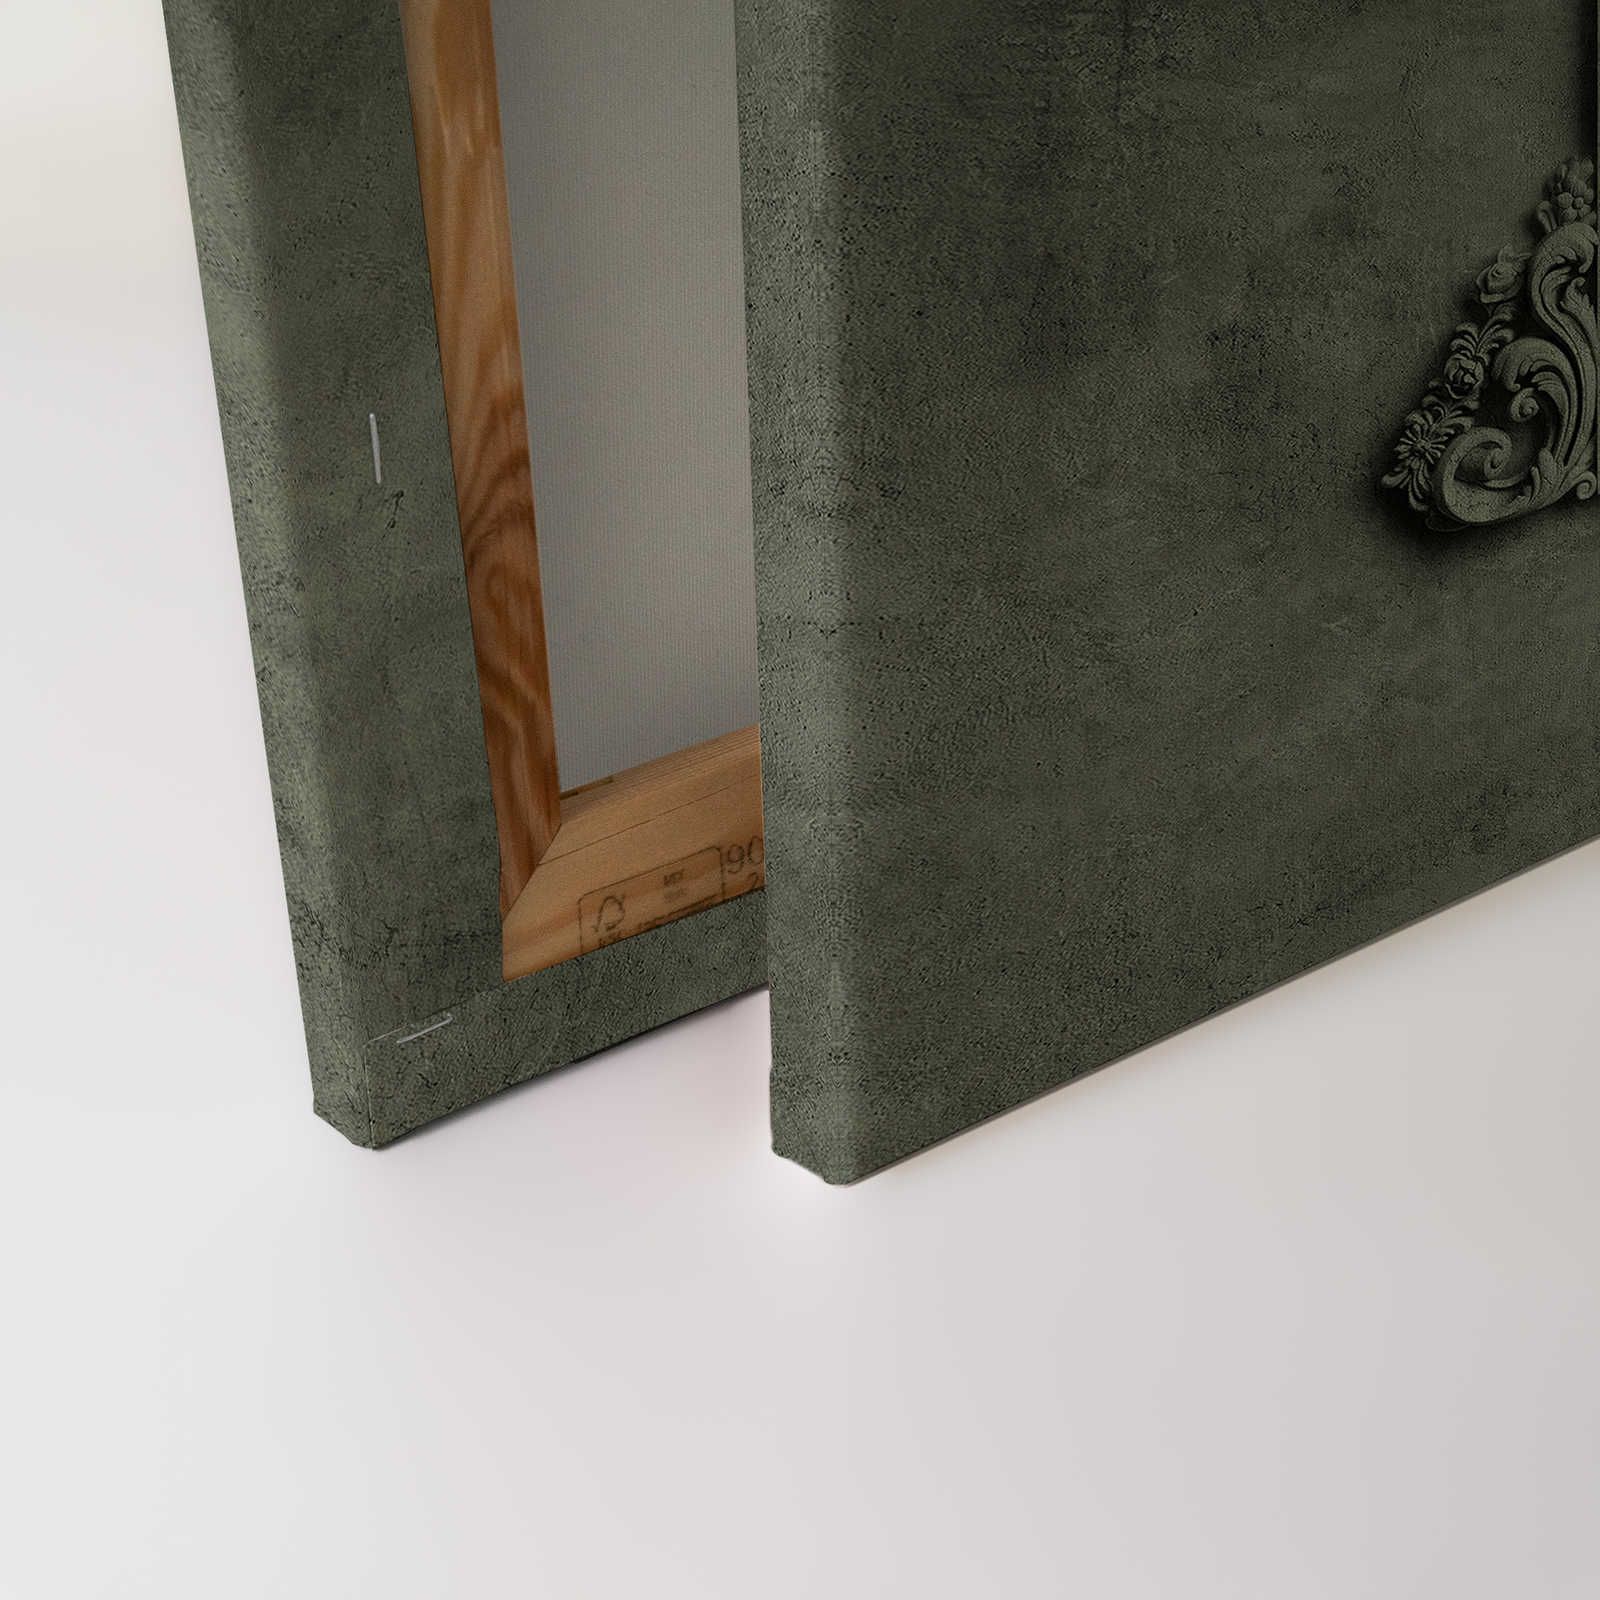             Lyon 2 - Canvas painting 3D stucco frame & plaster look in green - 1.20 m x 0.80 m
        